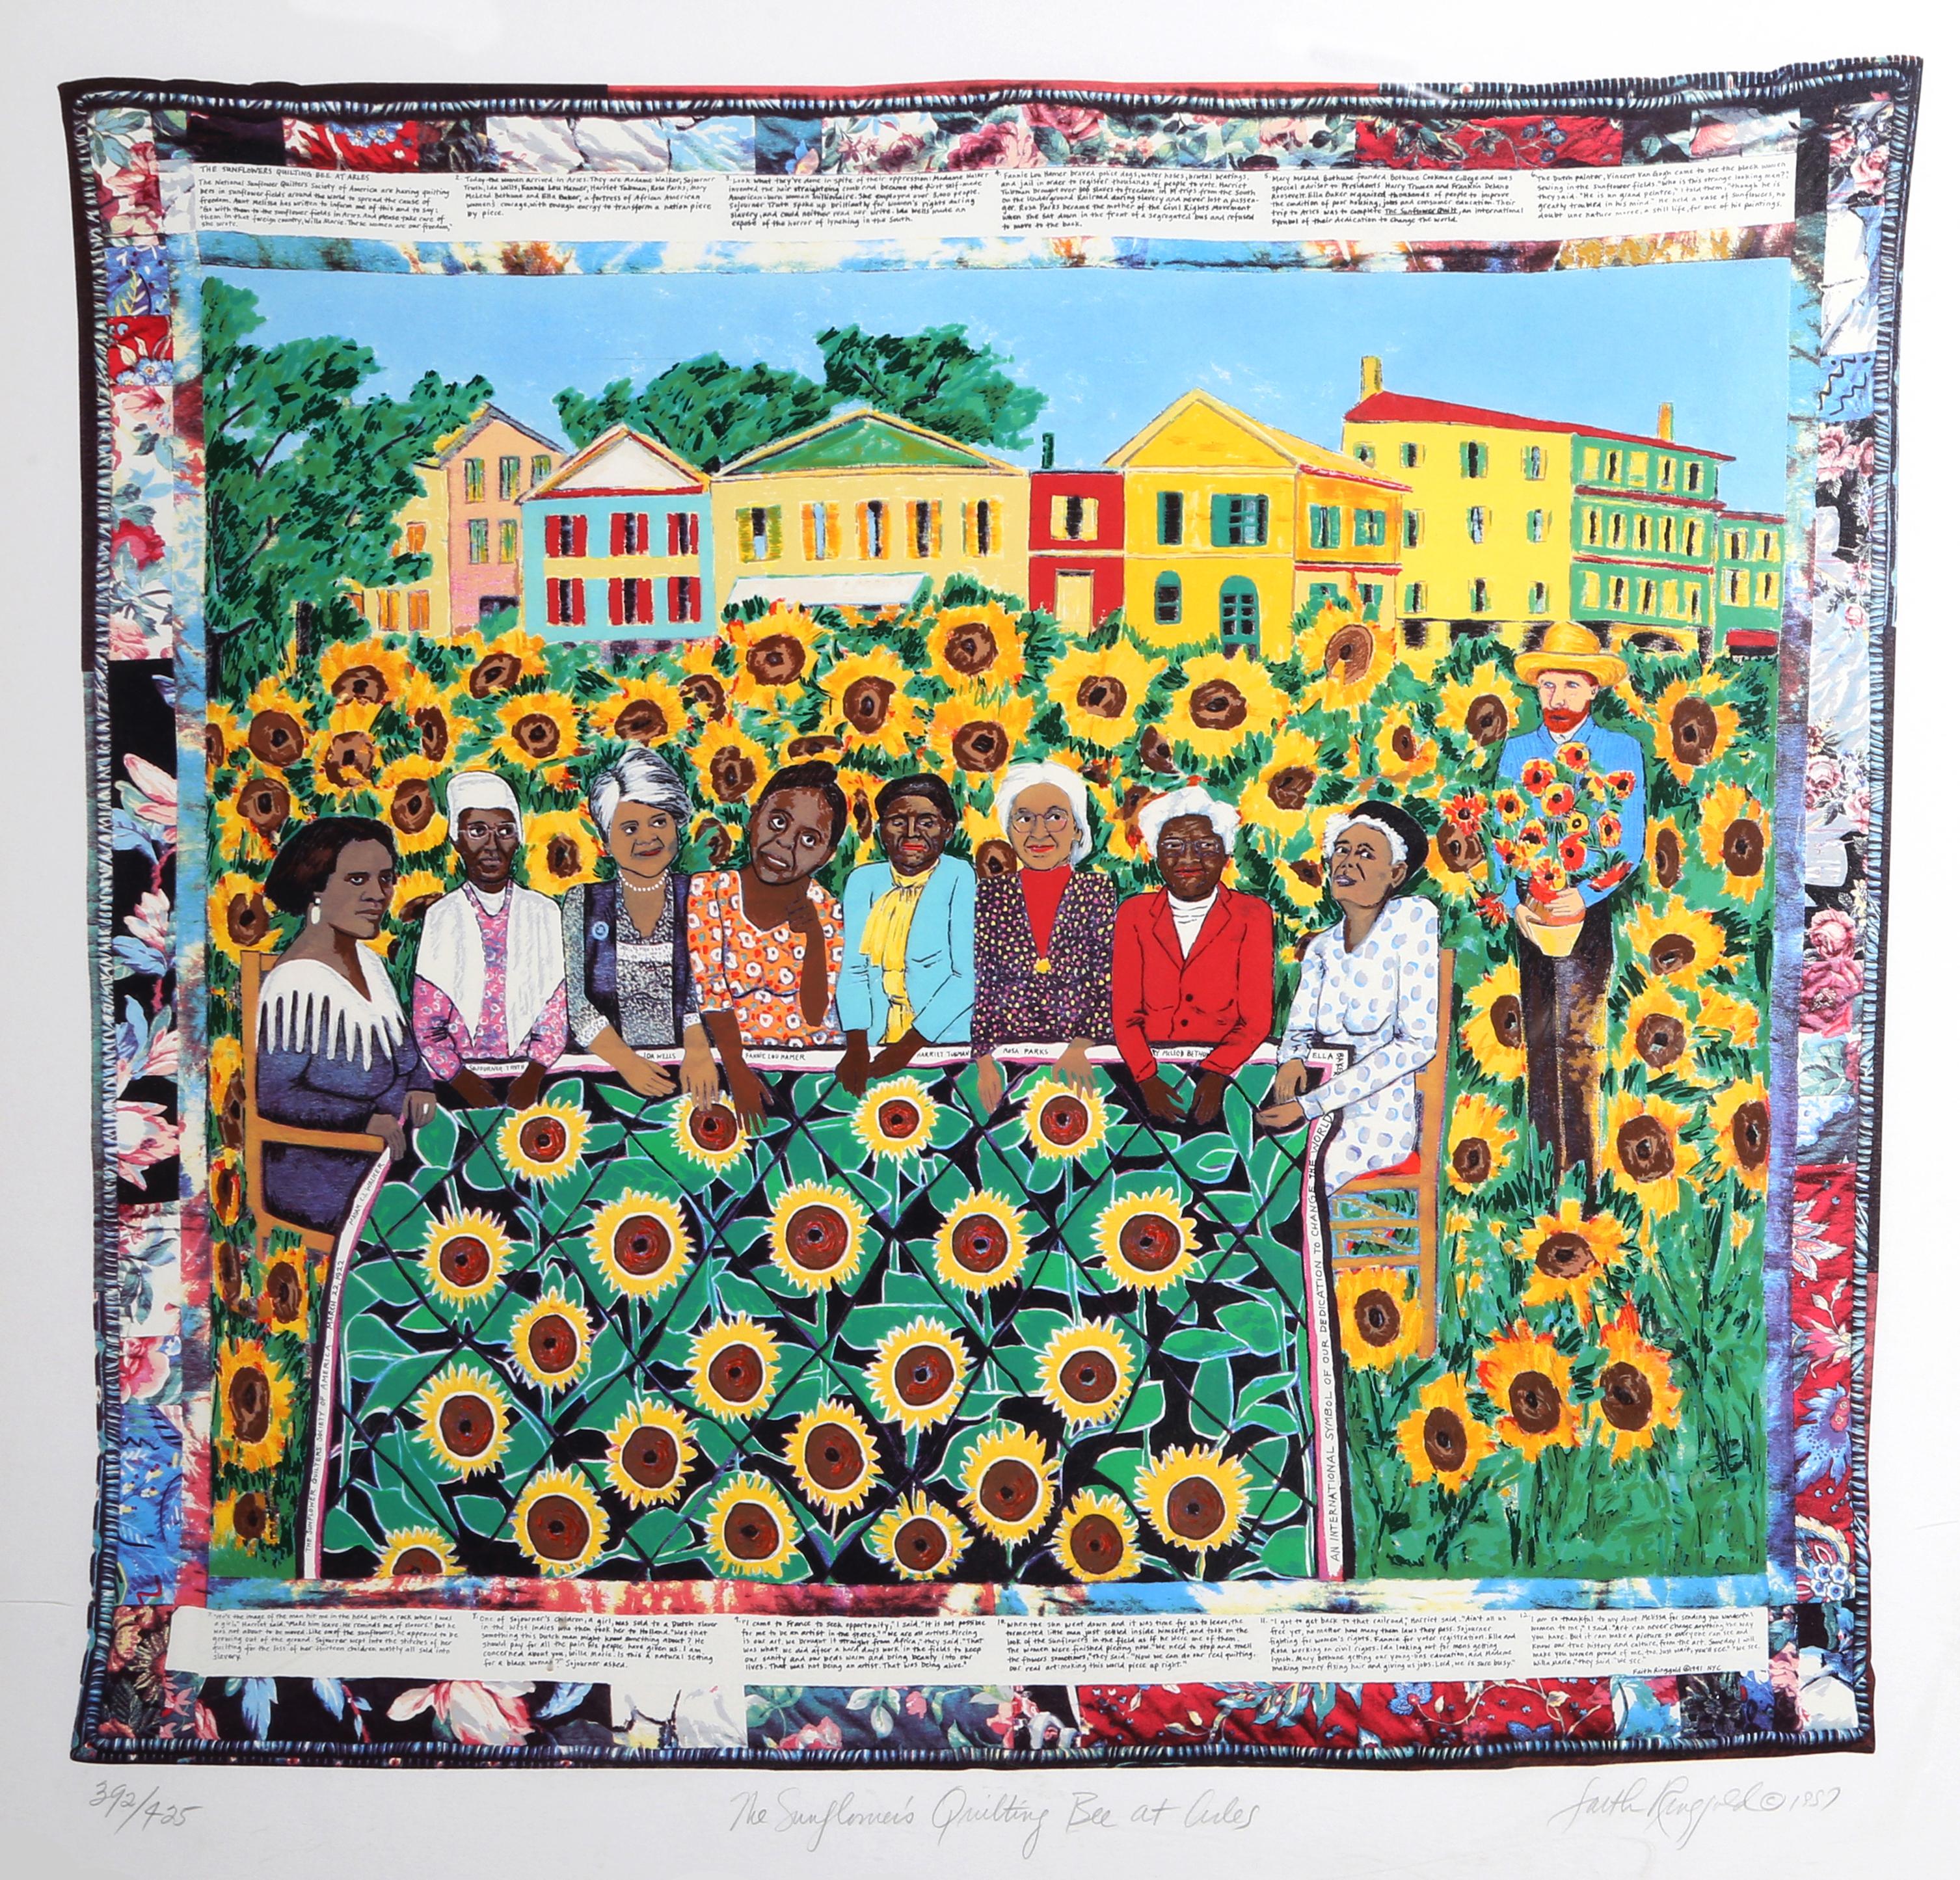 Faith Ringgold Figurative Print - The Sunflower's Quilting Bee at Arles